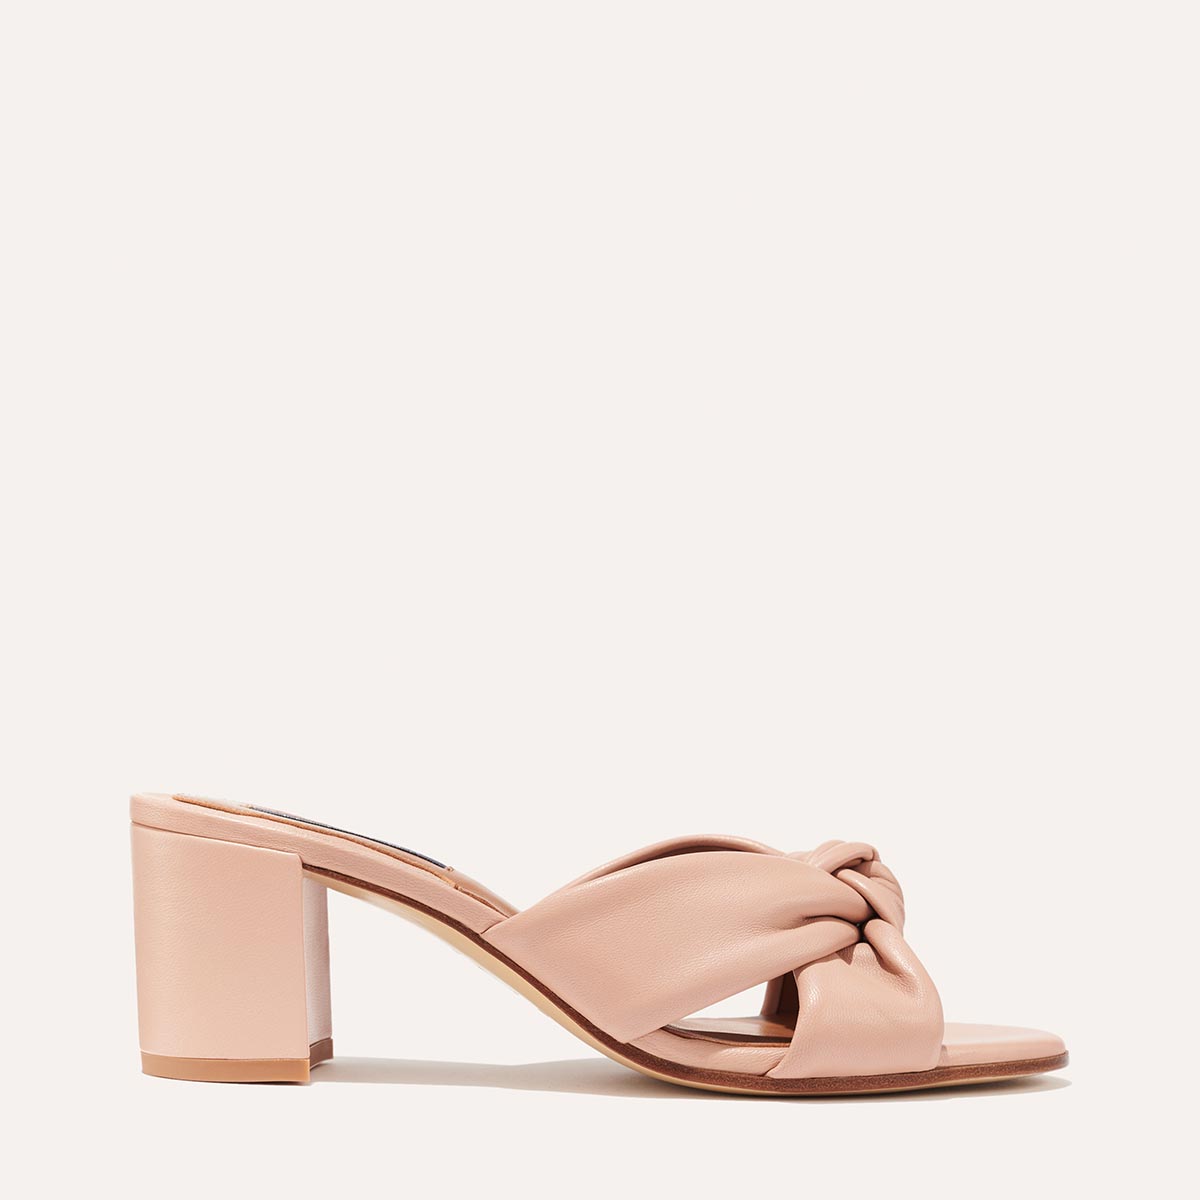 Margaux's Carmine Mule in nude pink nappa leather with a knot detail and comfortable block heel